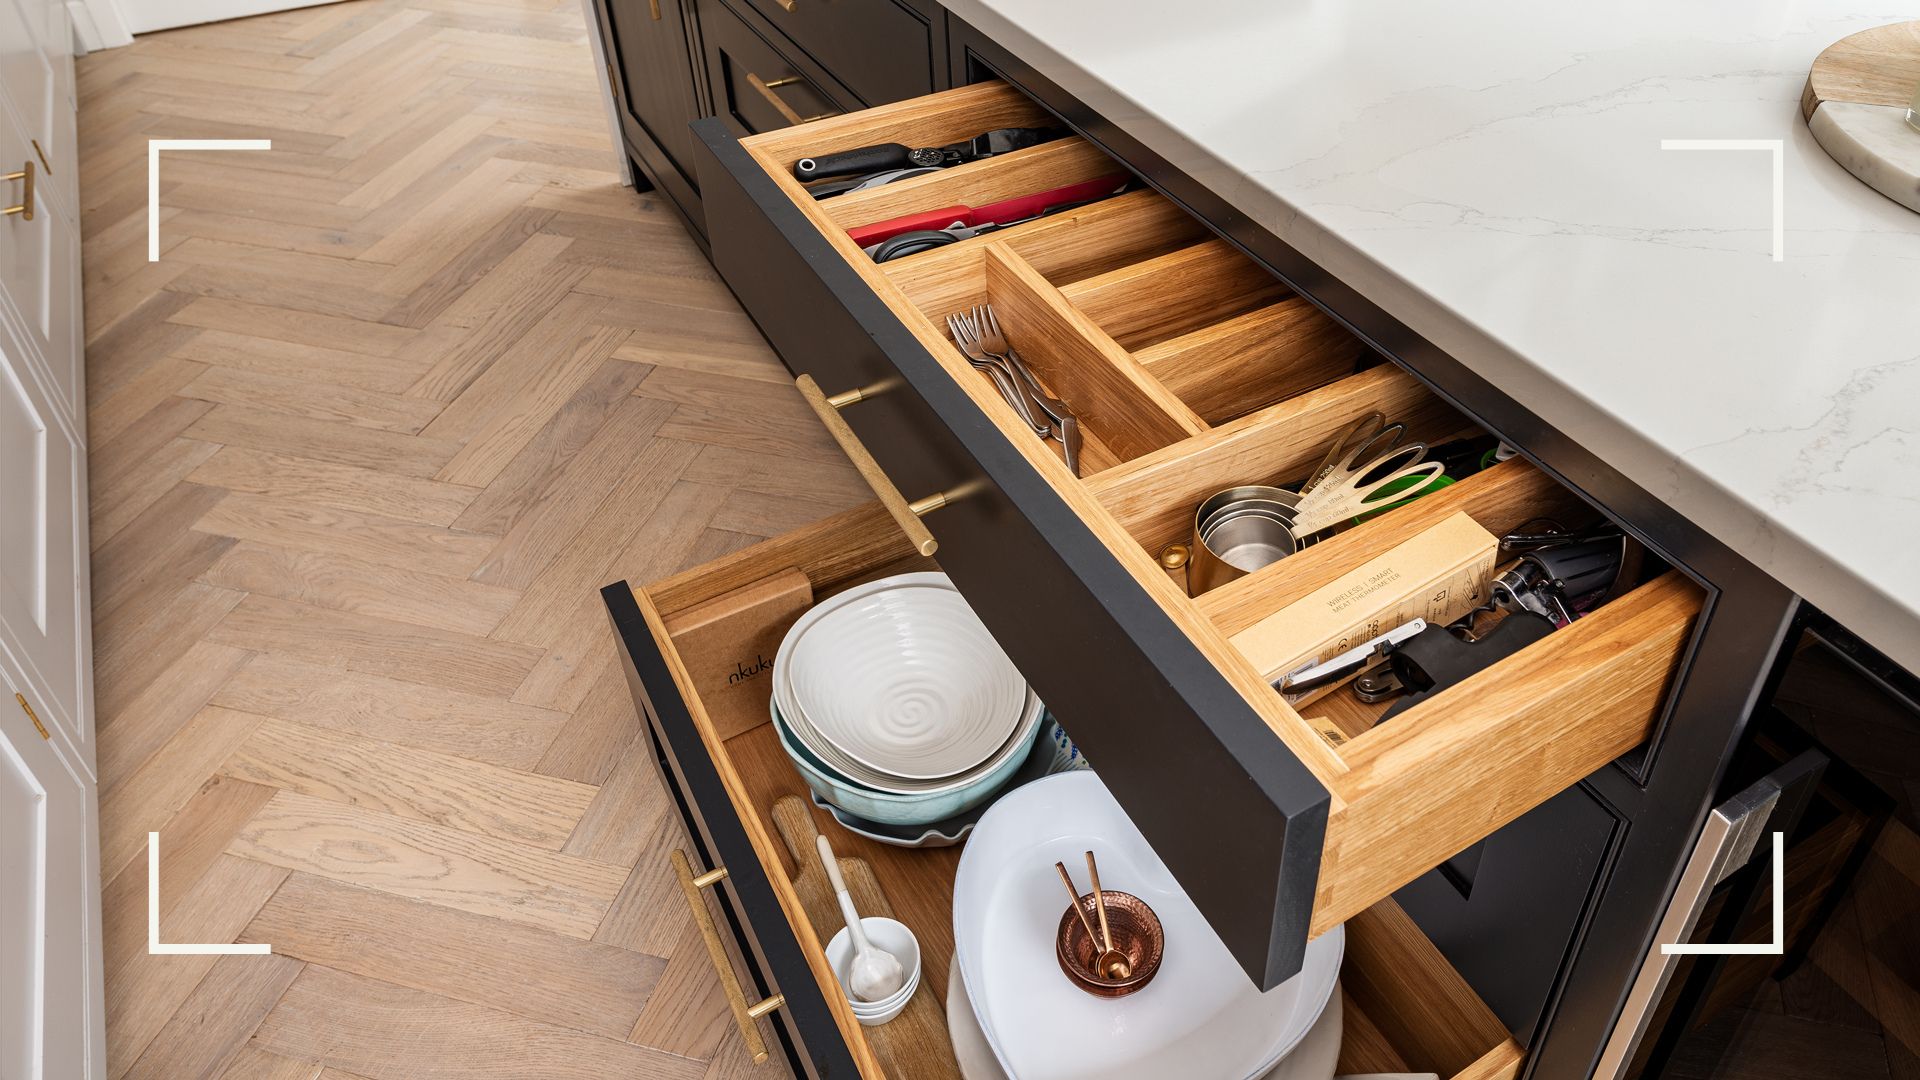 4 Organizing Trends That Need to Go Away Now - Organizing Experts Reveal  the Storage Trends They're Sick of Seeing